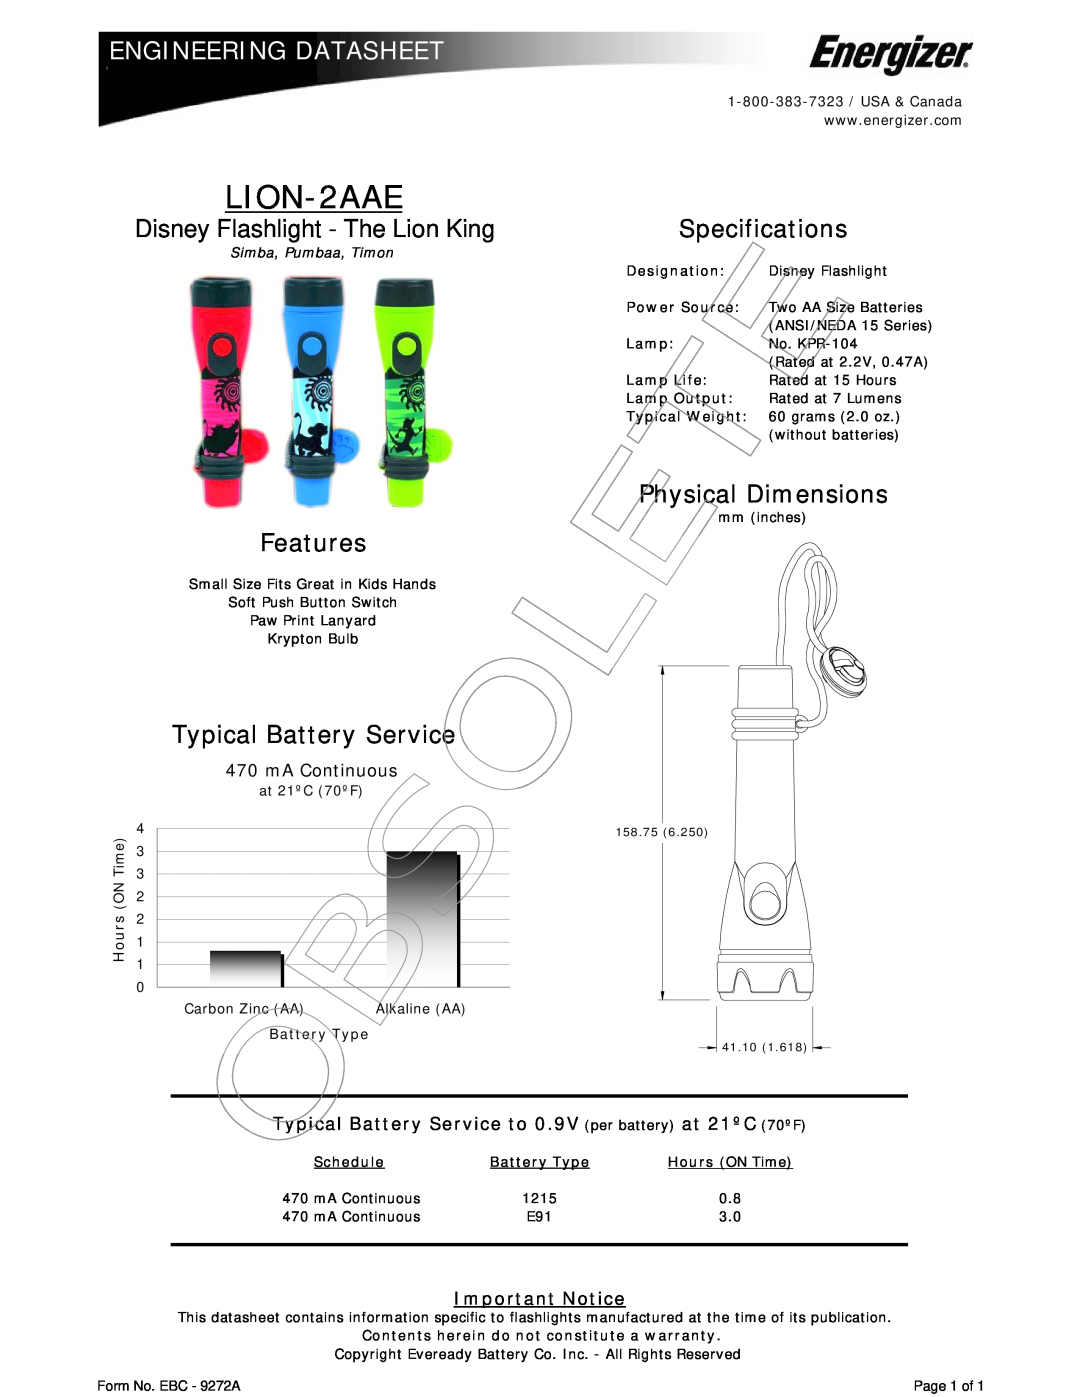 Energizer LION-2AAE dimensions Engineering Datasheet, Disney Flashlight - The Lion King, Features, Typical Battery Service 